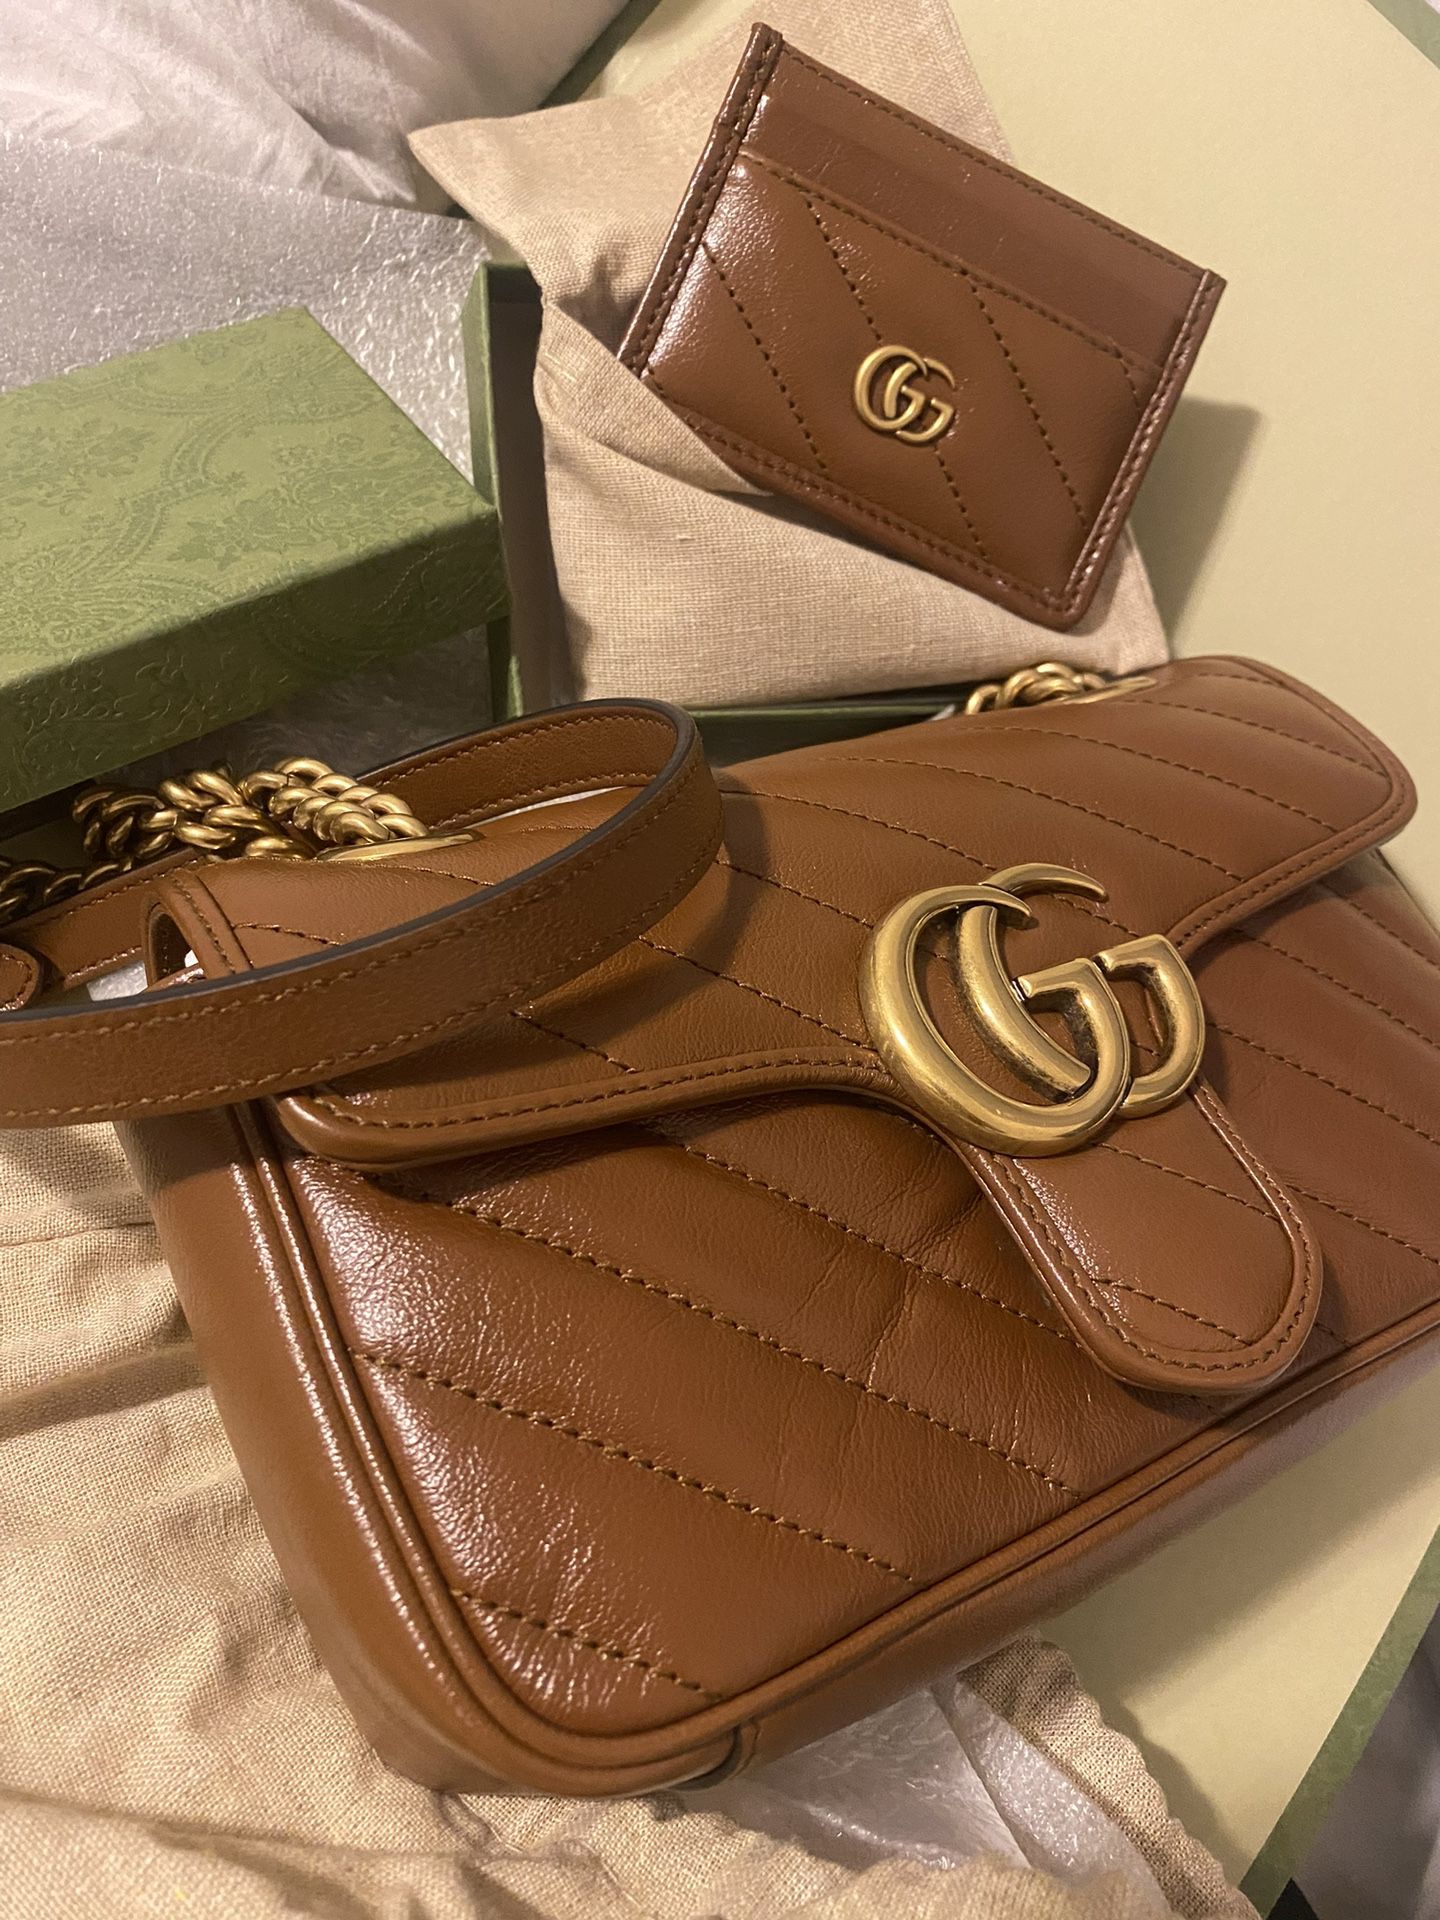 Gucci Purse And Card Wallet 